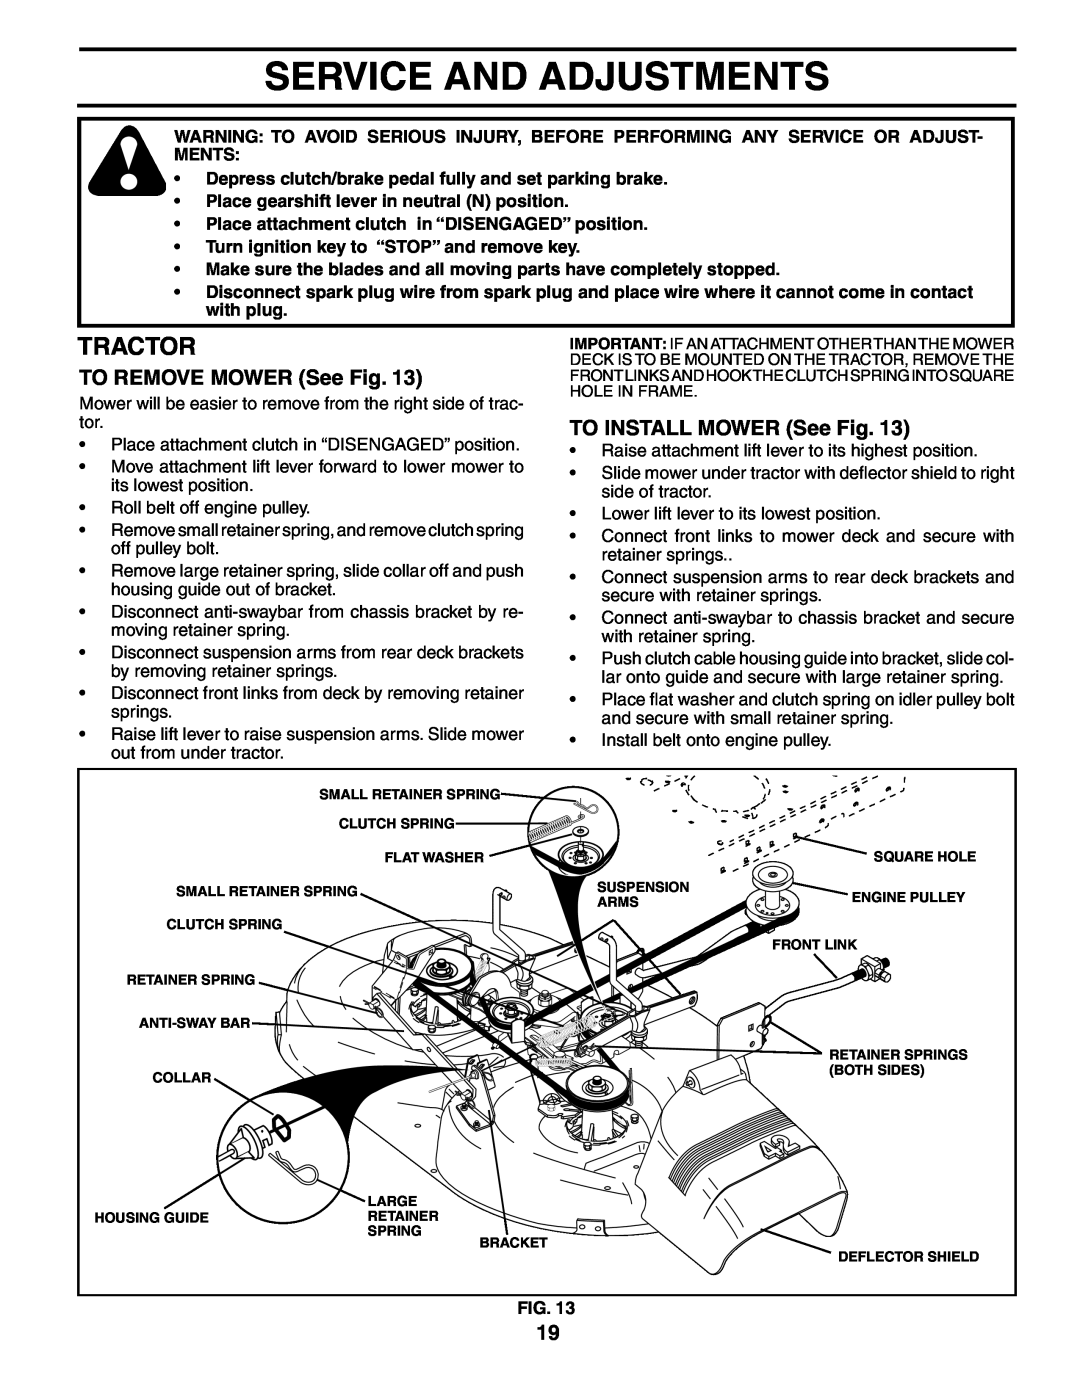 Poulan 960120003 manual Service And Adjustments, TO REMOVE MOWER See Fig, TO INSTALL MOWER See Fig, Tractor 